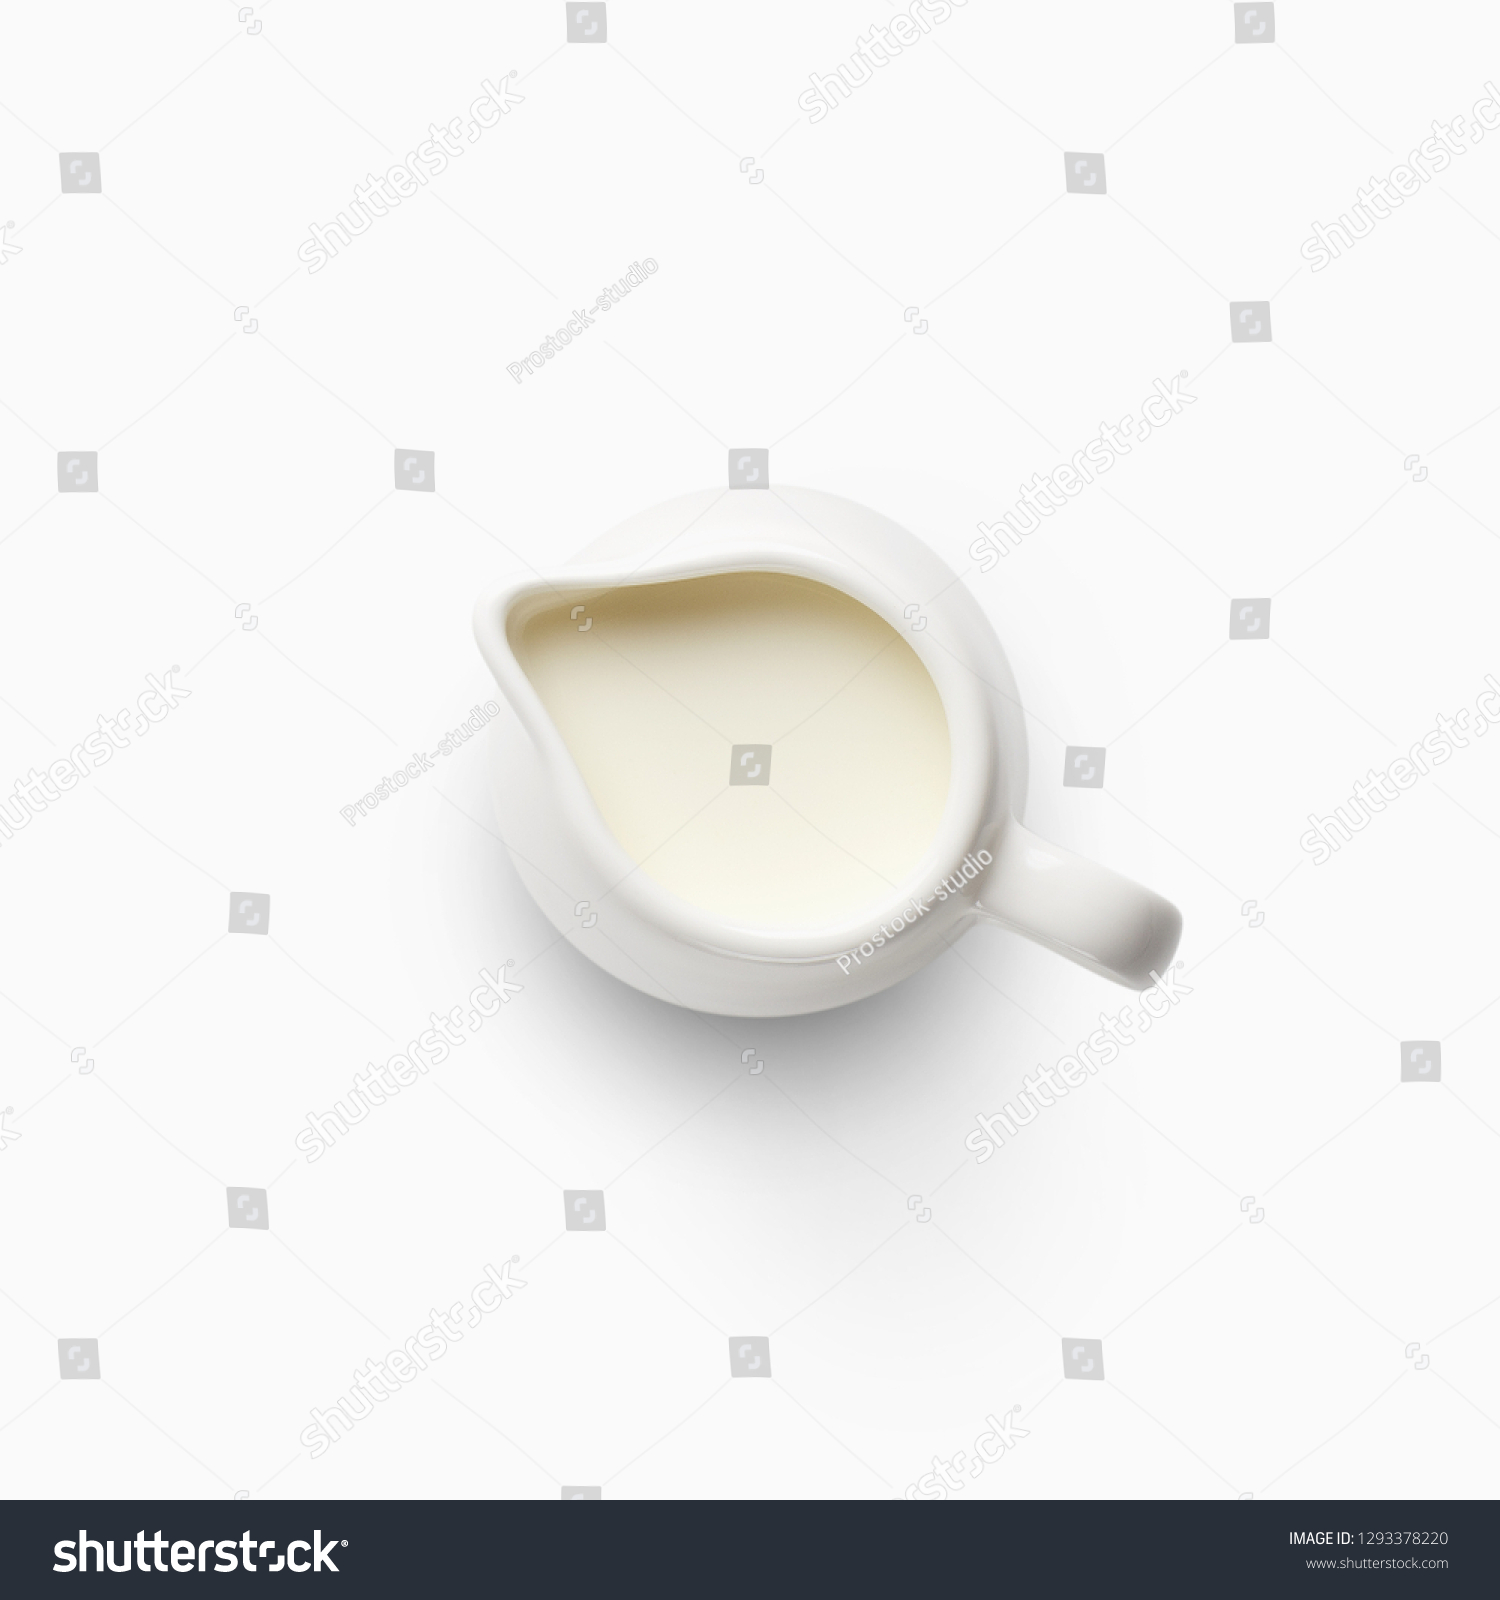 Milk jug isolated on white background., top view. Dairy product and healthy food concept #1293378220